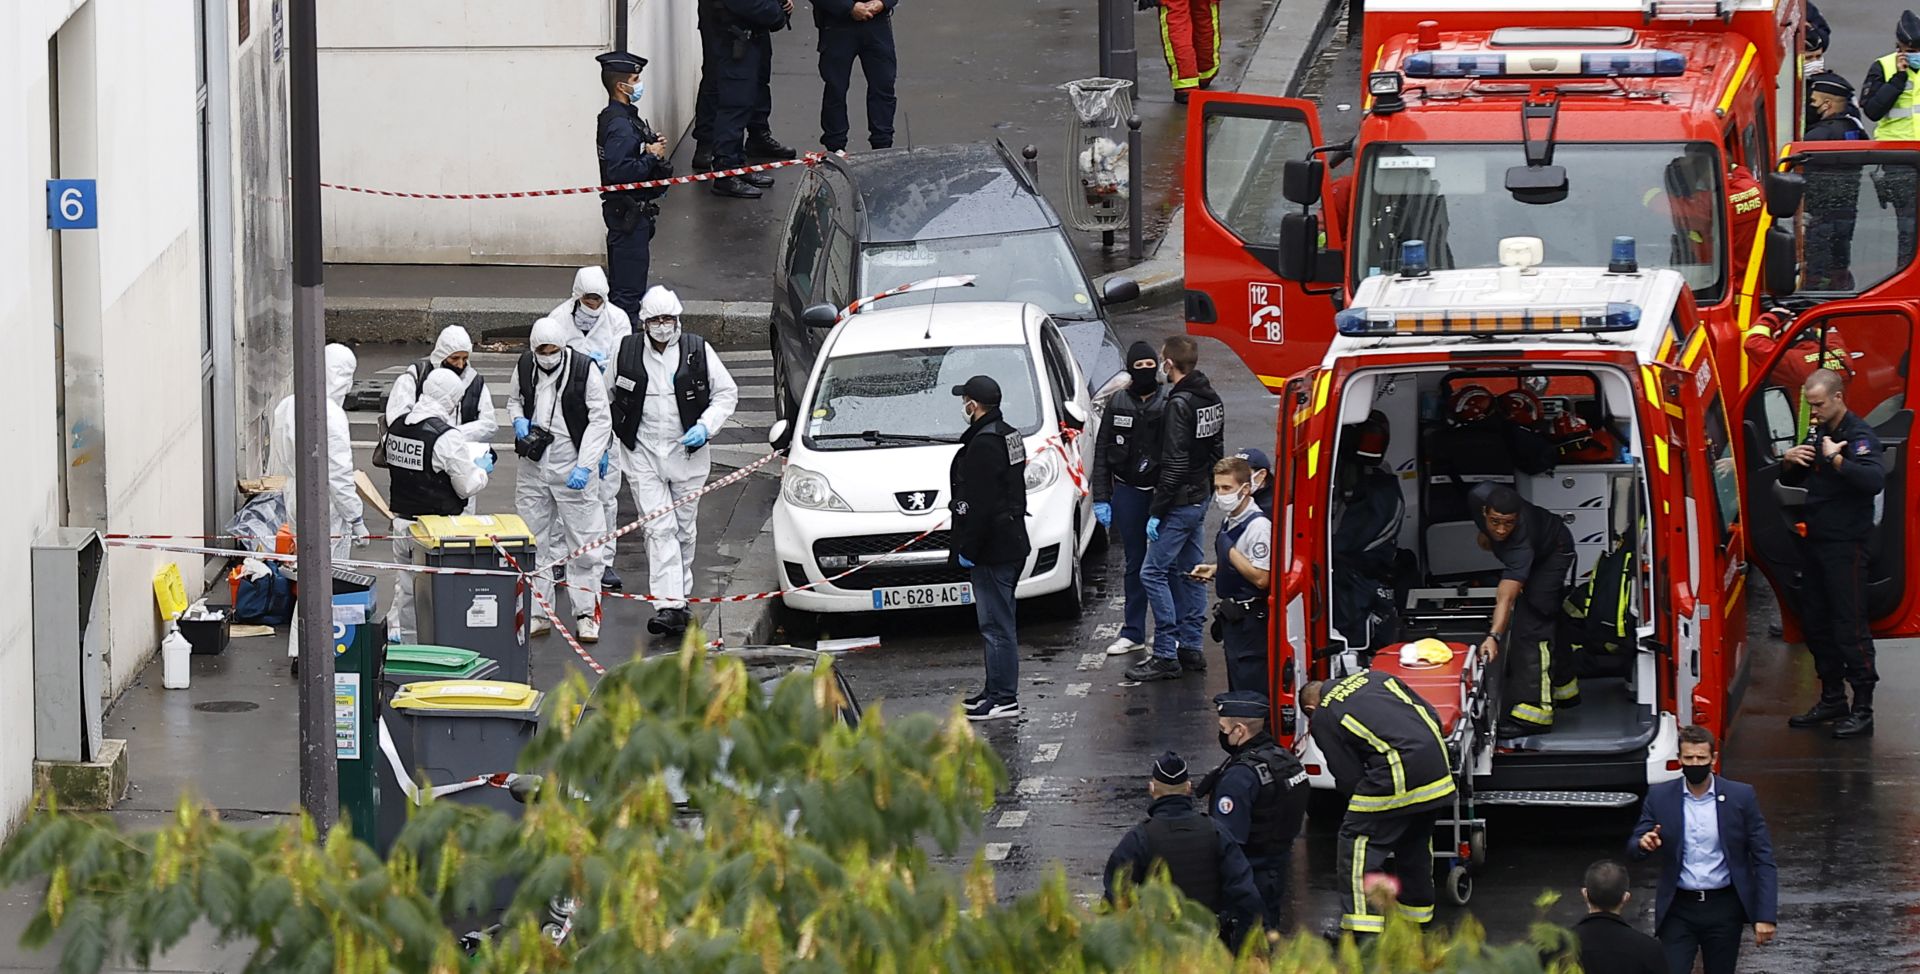 epa08696582 French police investigators work on the site of the knife attack near the former Charlie Hebdo offices, in Paris, France, 25 September 2020, after two people have been wounded. According to recent reports, two assailants have been arrested in the Bastille area.  EPA/IAN LANGSDON